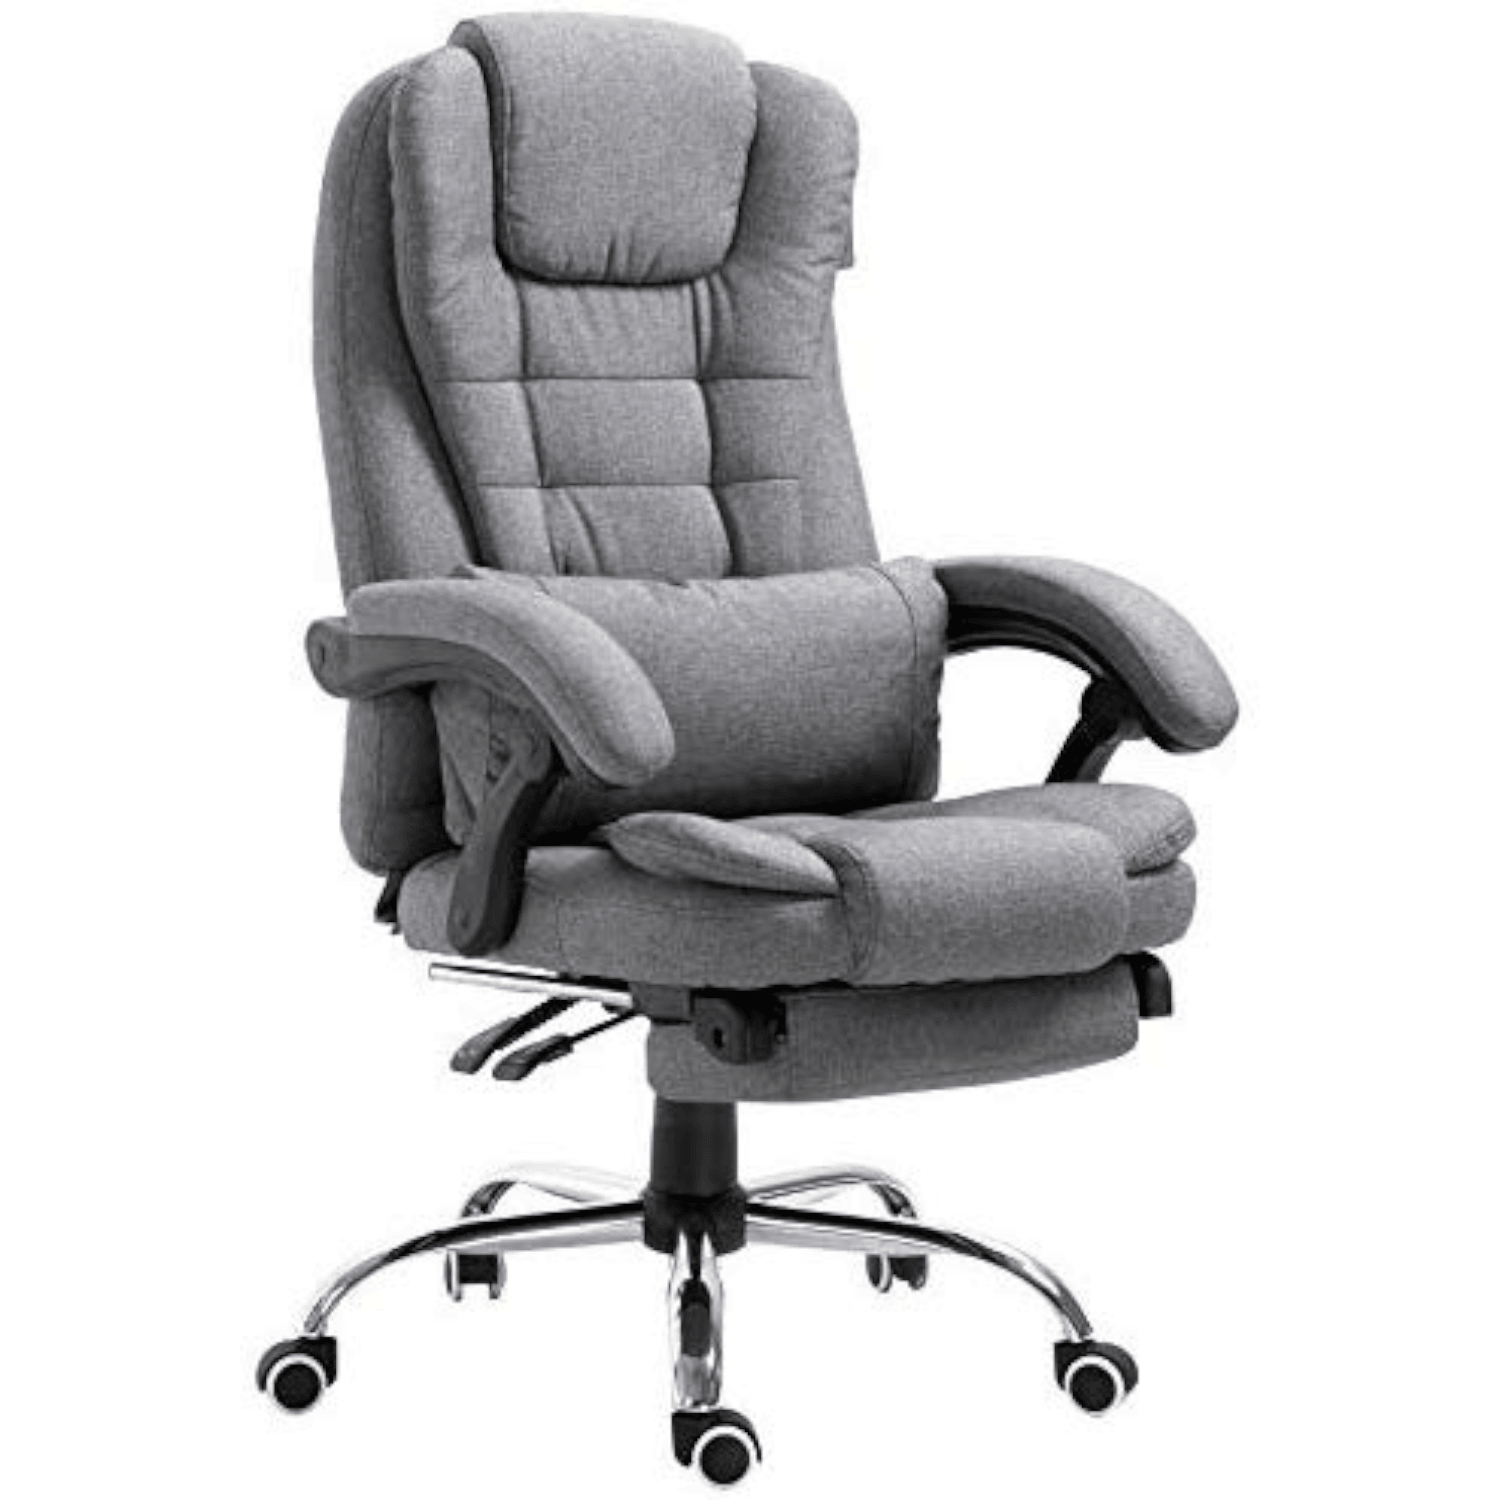 Executive Reclining Computer Desk Chair with Footrest, Headrest and